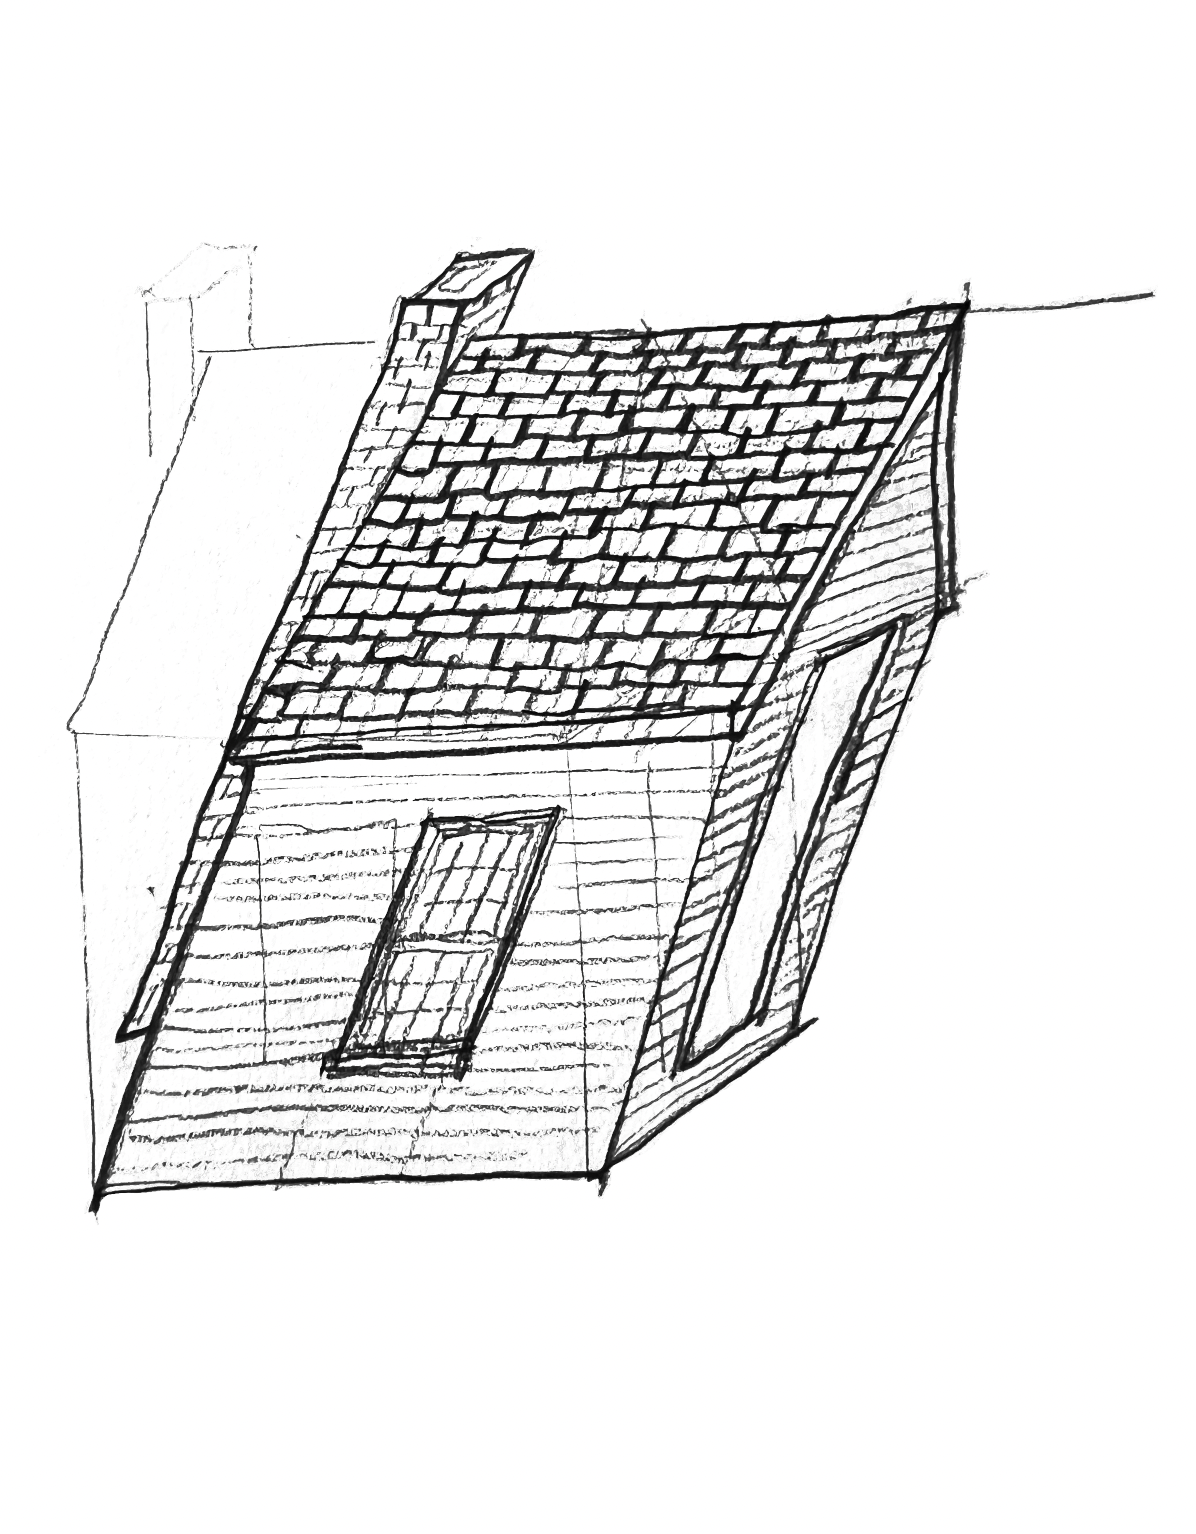 a pencil drawing showing a slanted house, by the artist hugh hayden